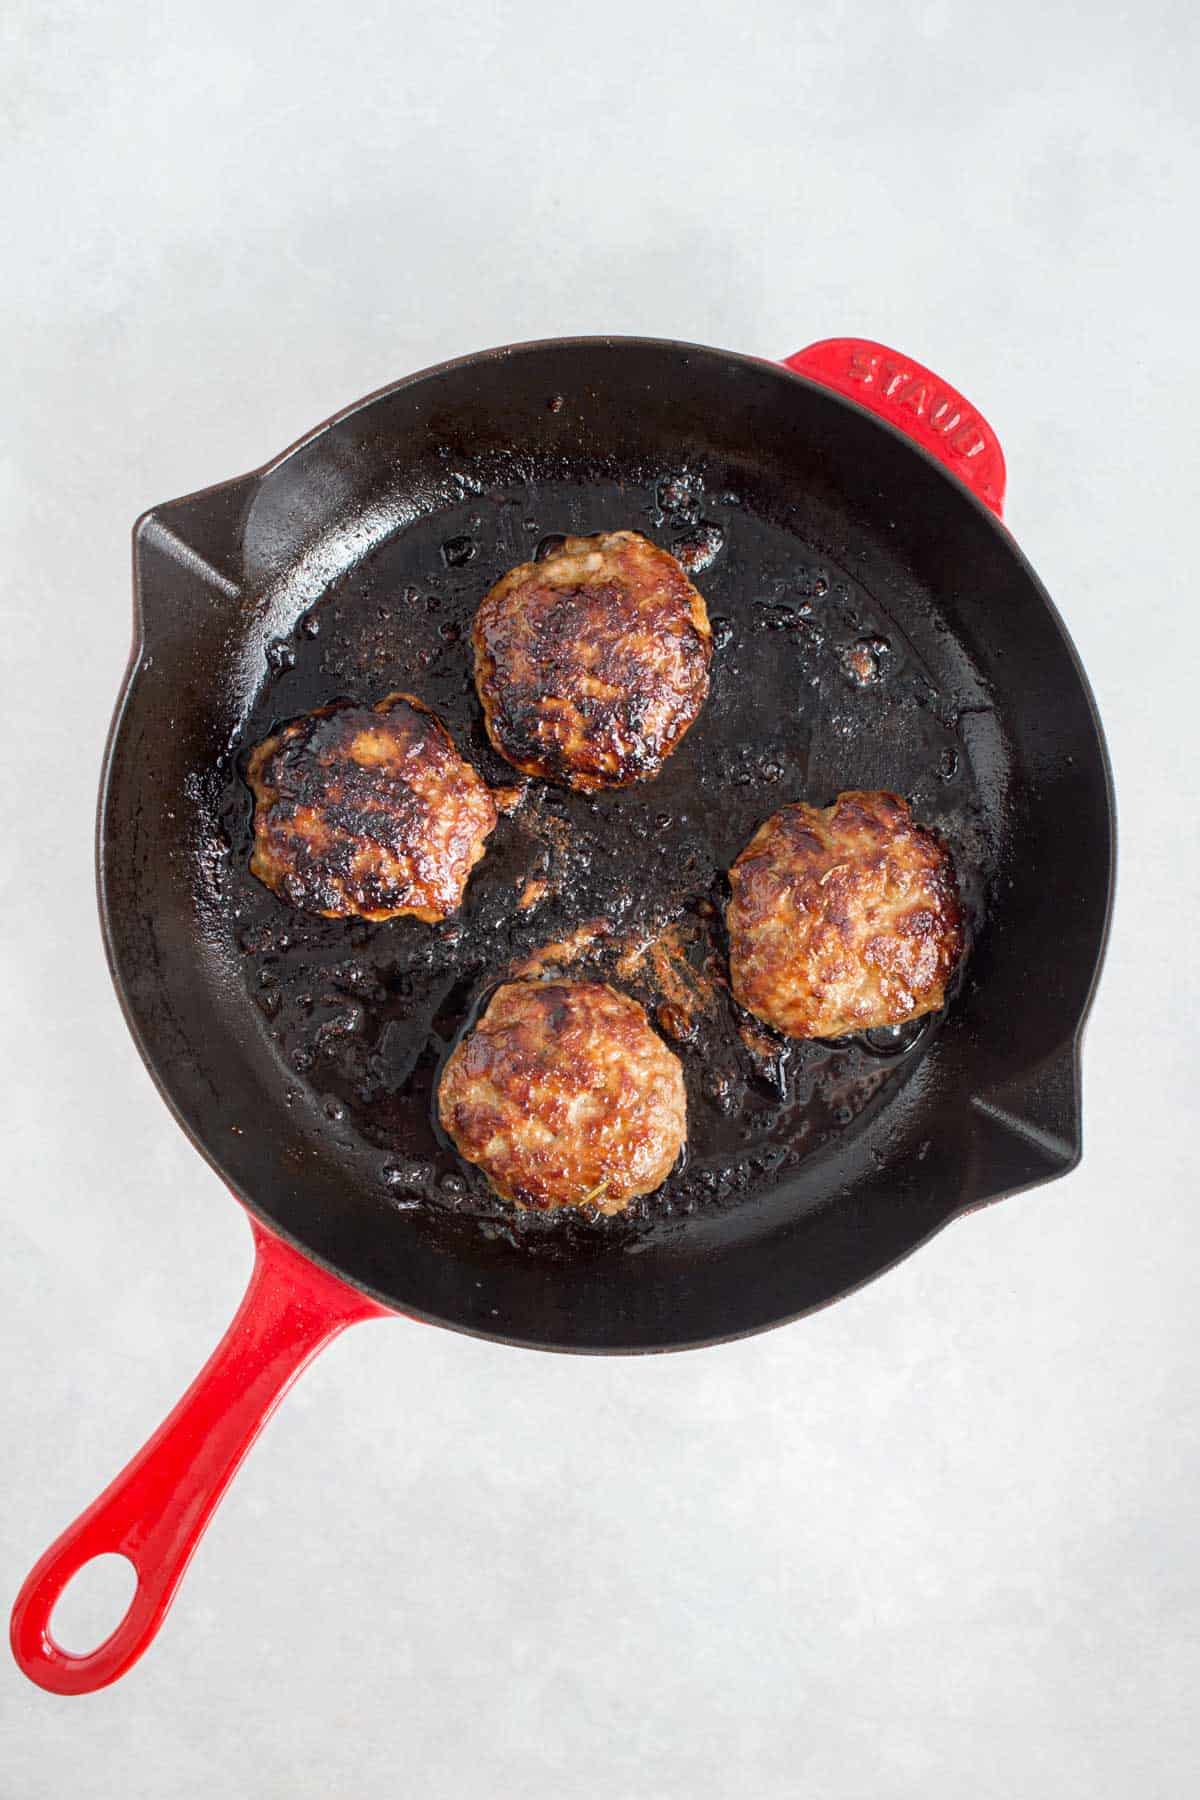 Sausage patties cooked in a cast iron pan.